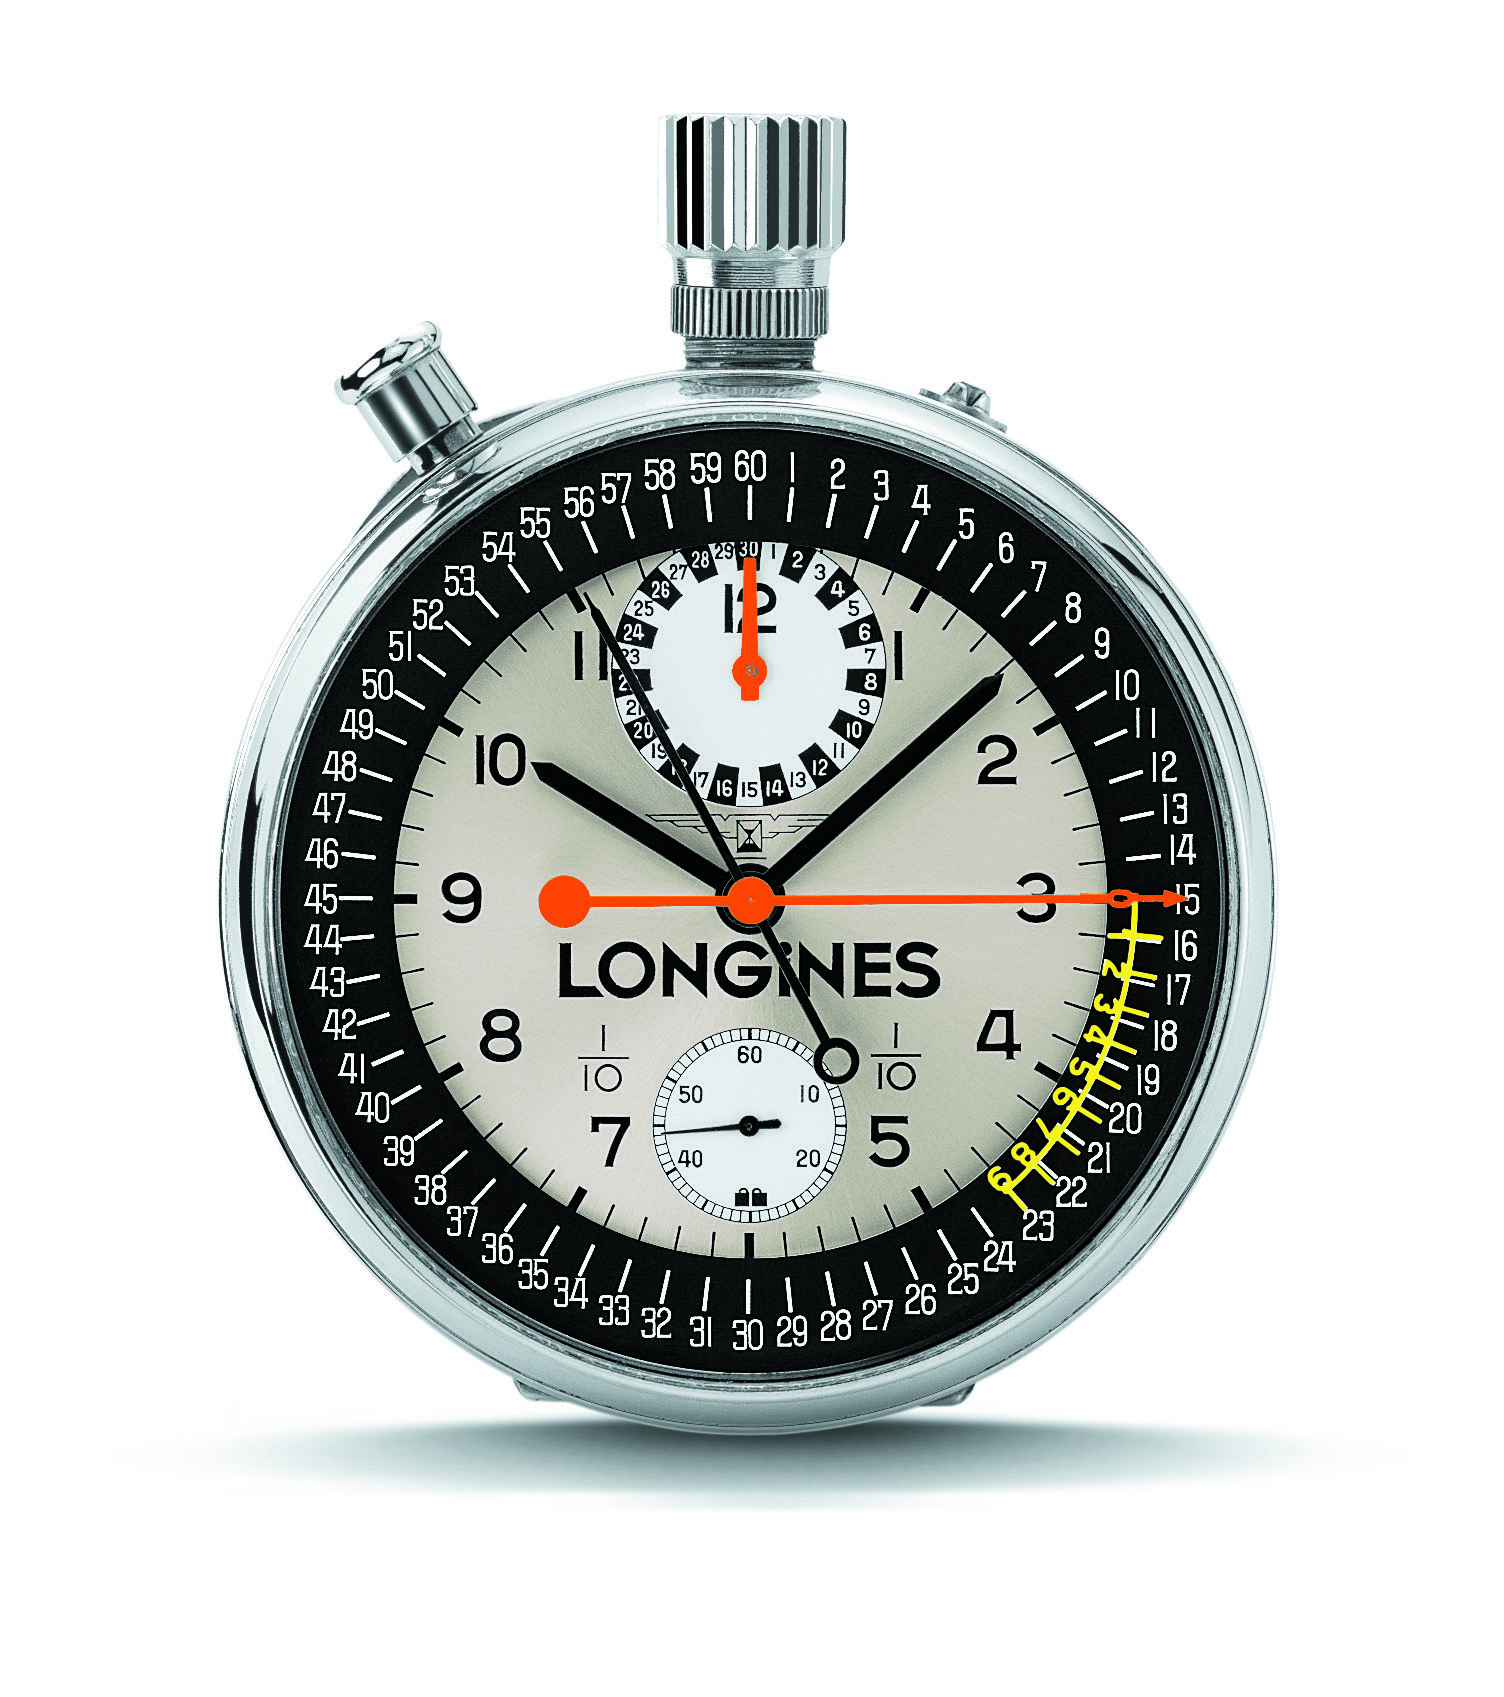 Longines ref 262 chronograph pocket watch replica launched in 1966. Image: Longines.